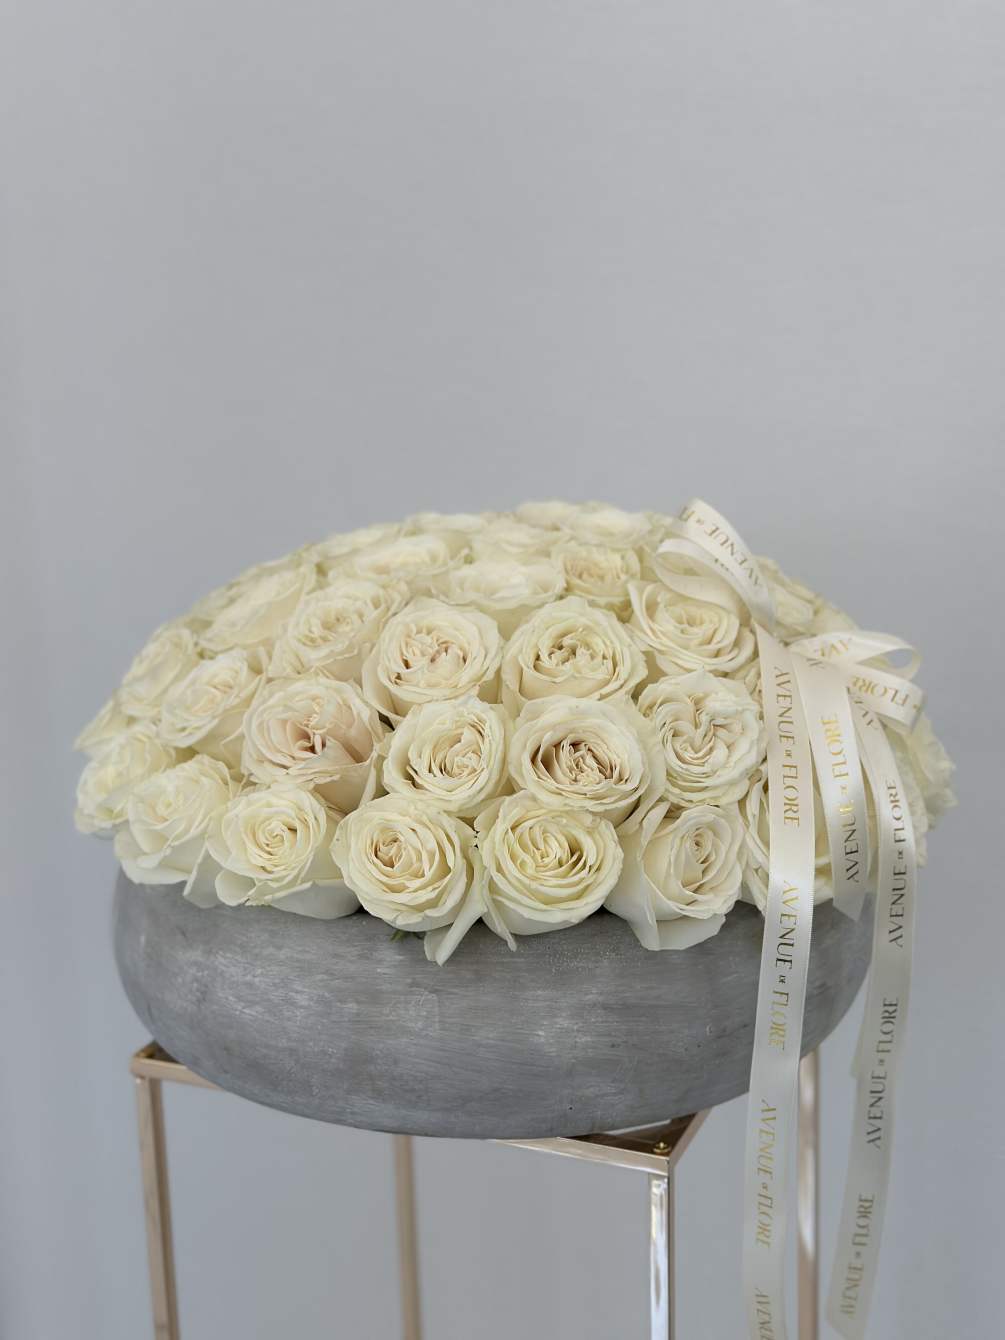 Embrace timeless sophistication with our Ivory Chic Arrangement, presented in a sleek